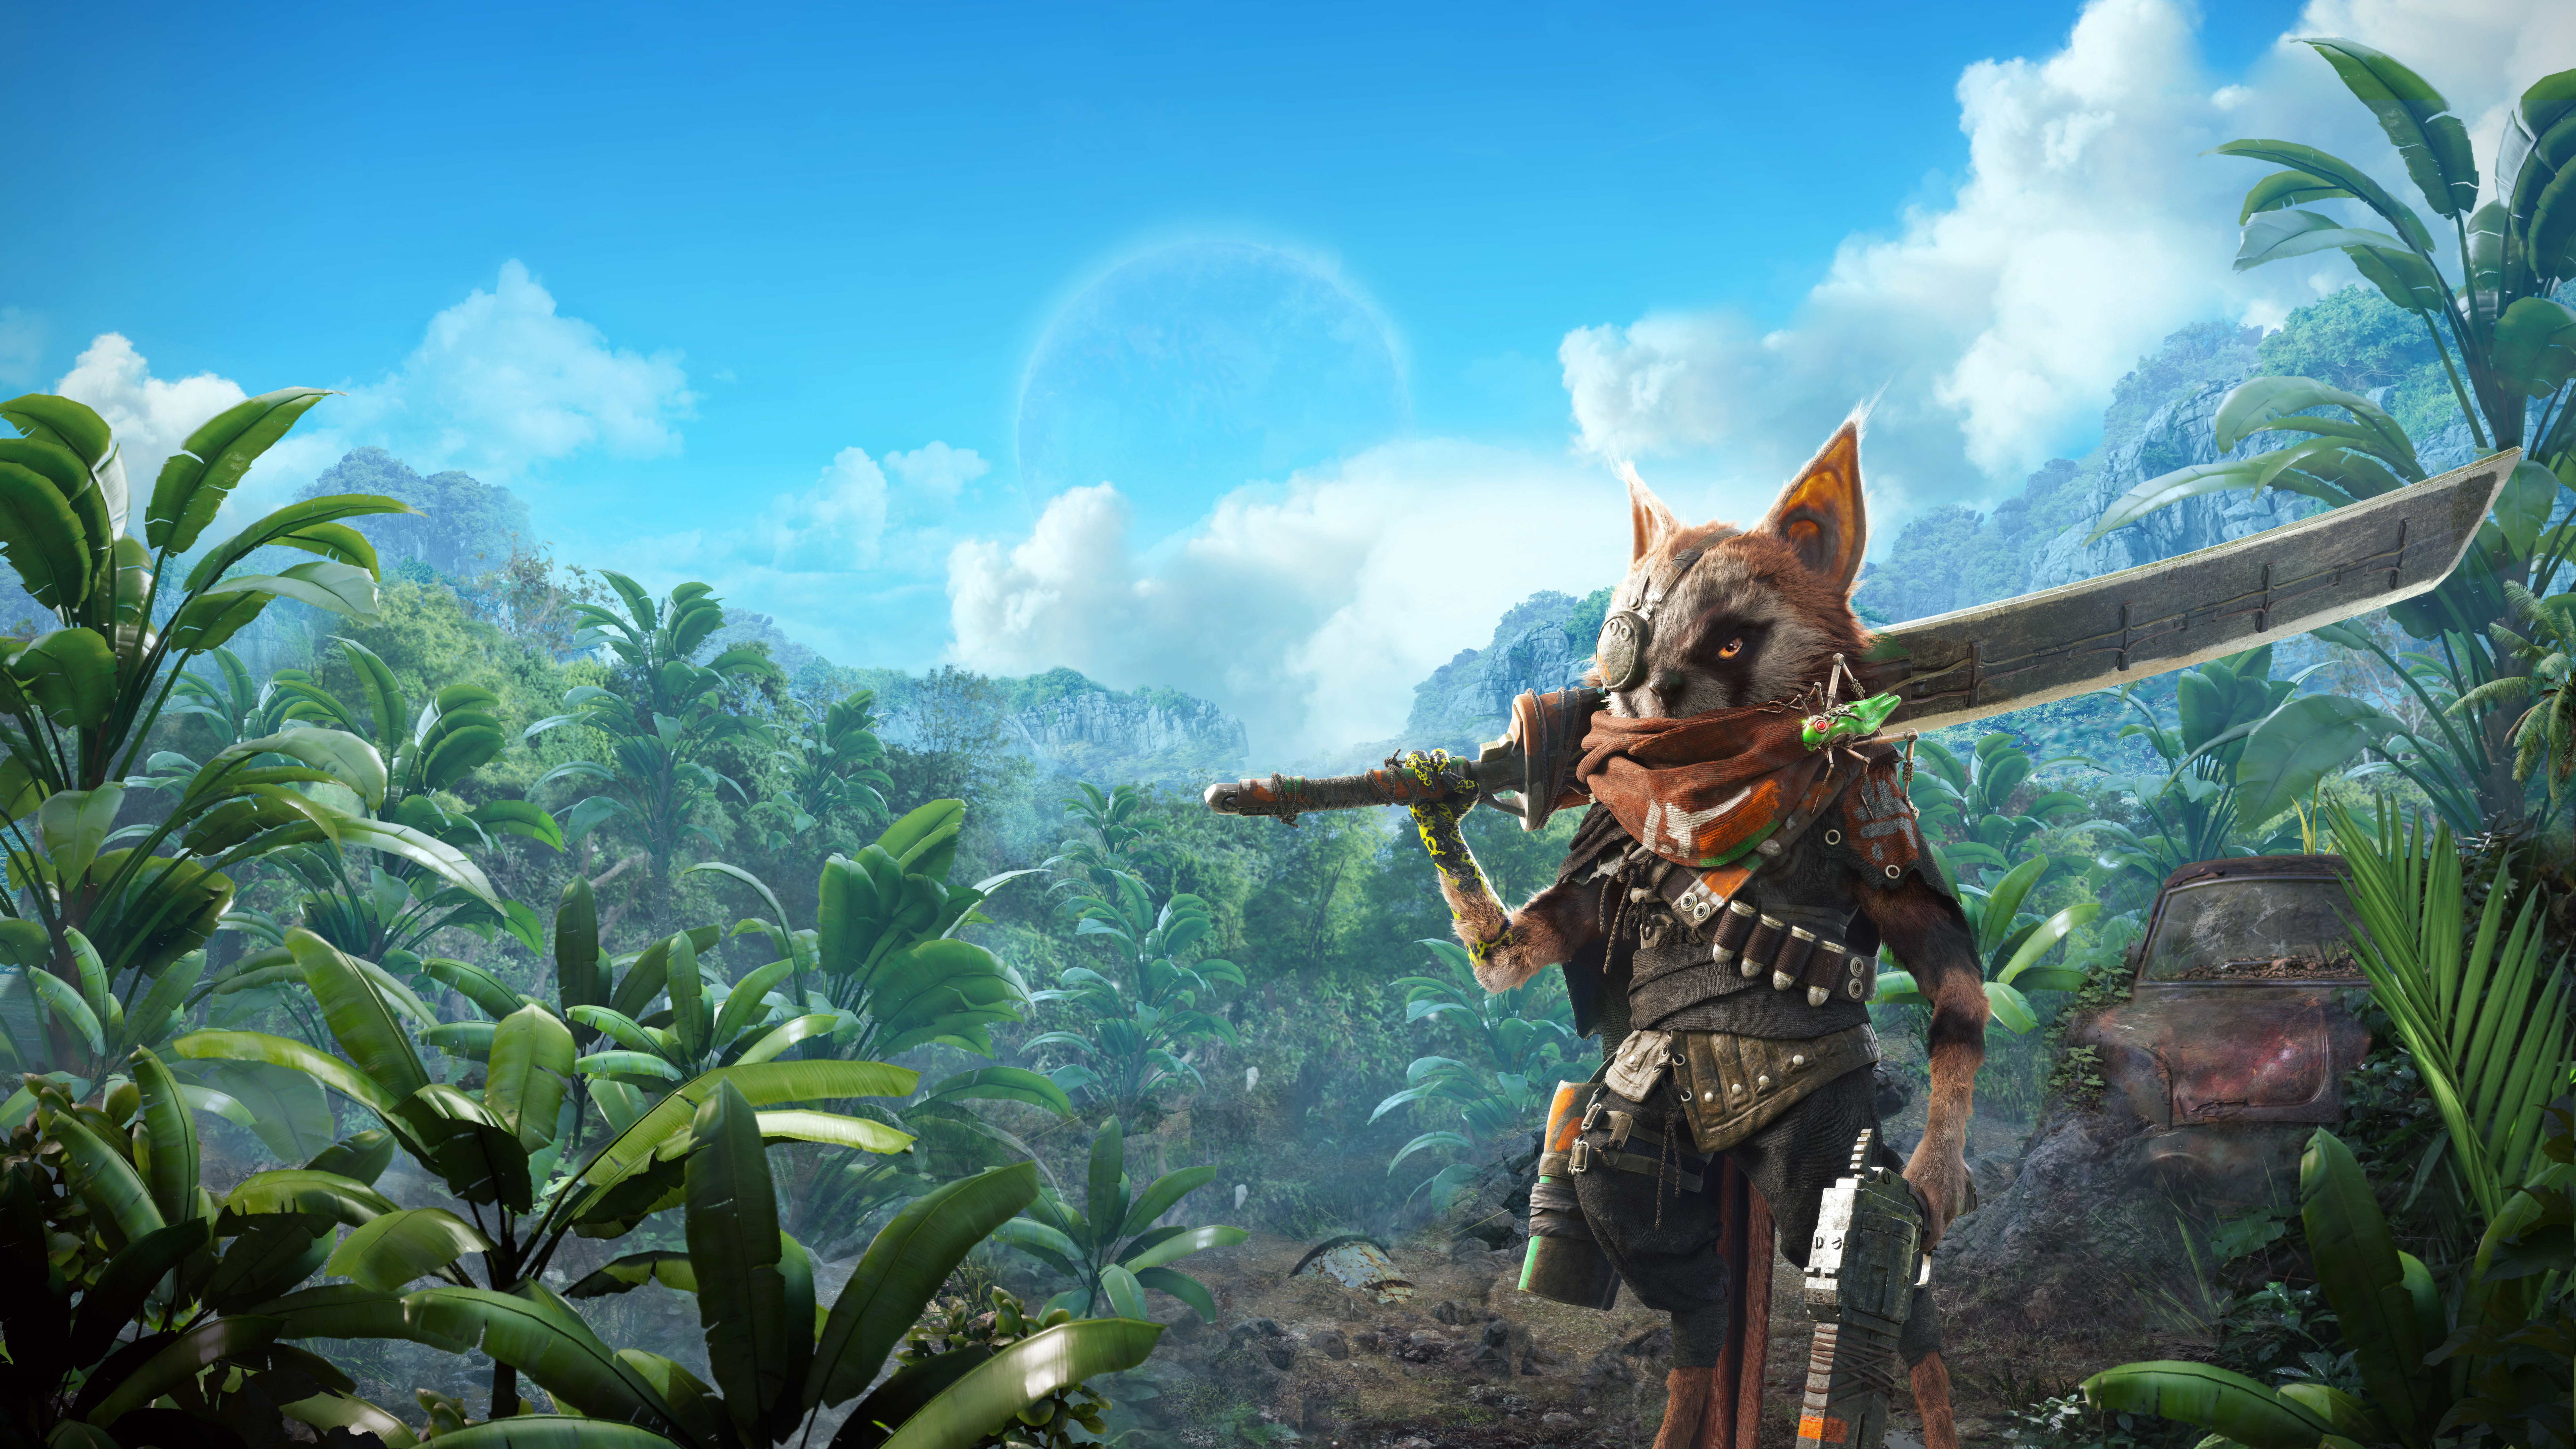 Biomutant, Xbox One, pc Game, Adventure Game, Jungle. Wallpaper in 7680x4320 Resolution